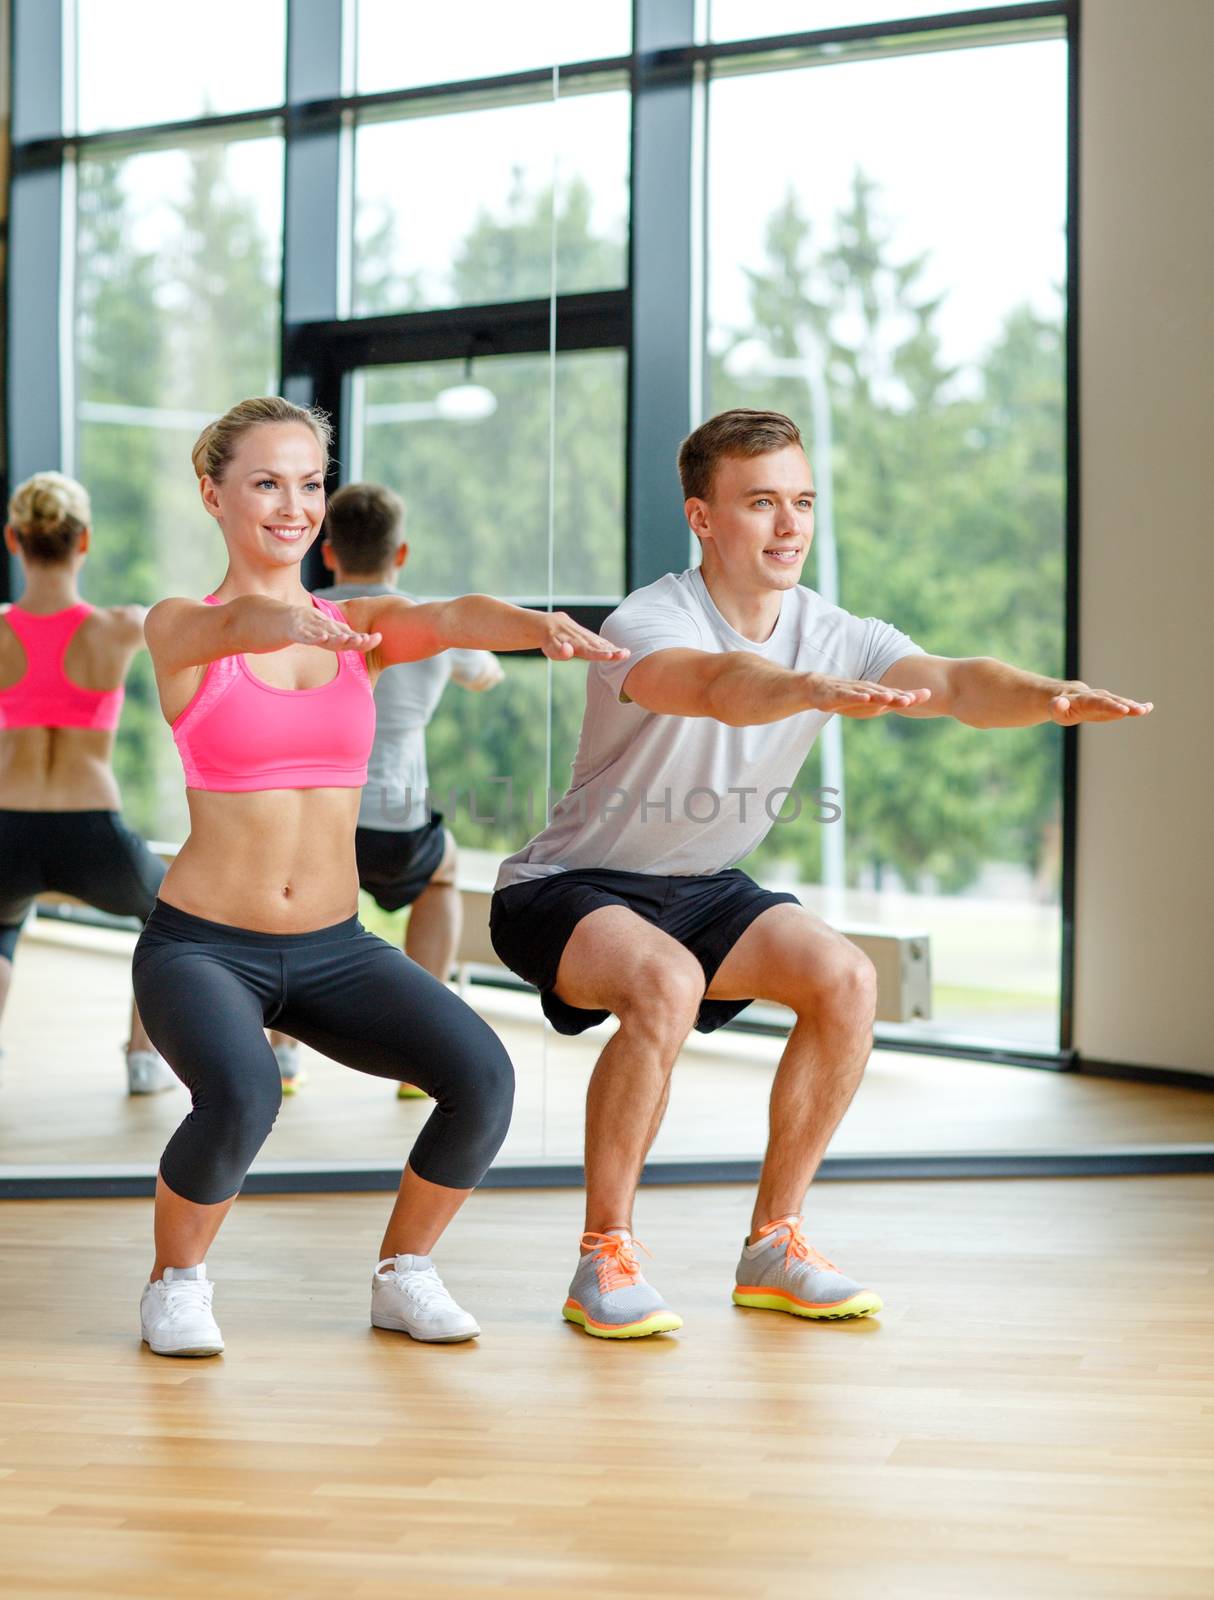 sport, fitness, lifestyle and people concept - smiling man and woman exercising in gym